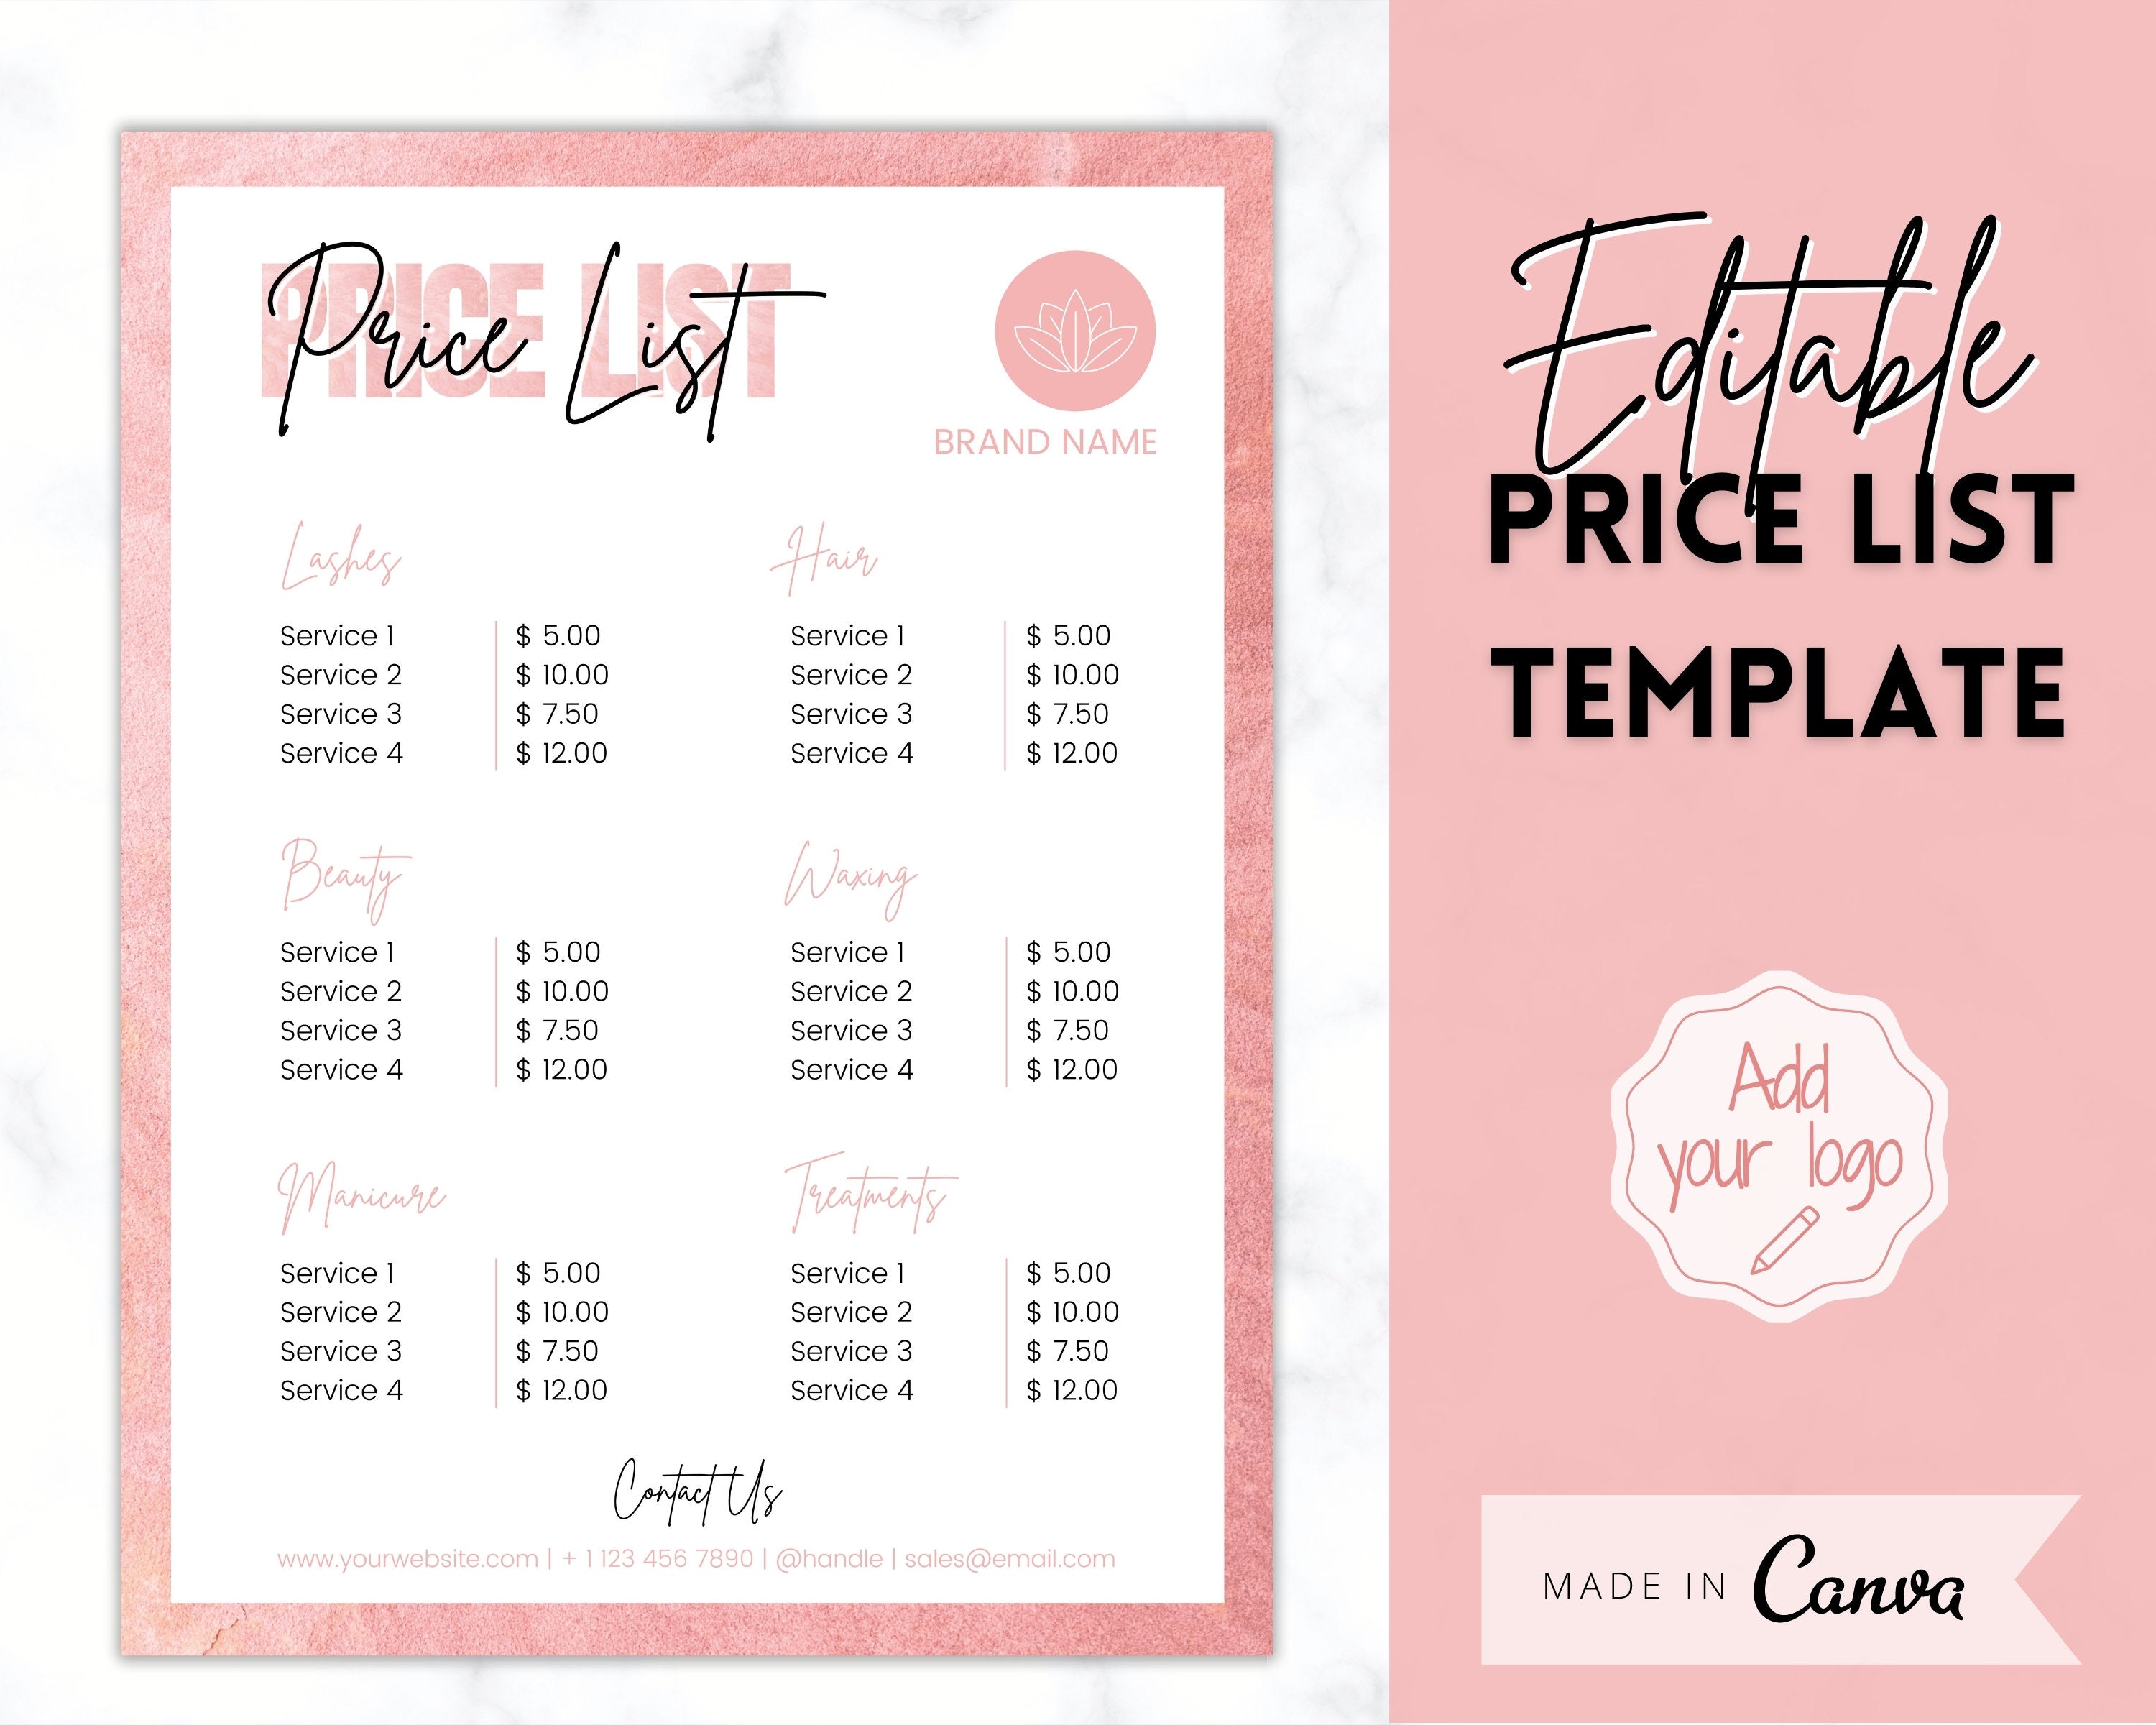 Editable Price List Template | Create a Professional Price Guide